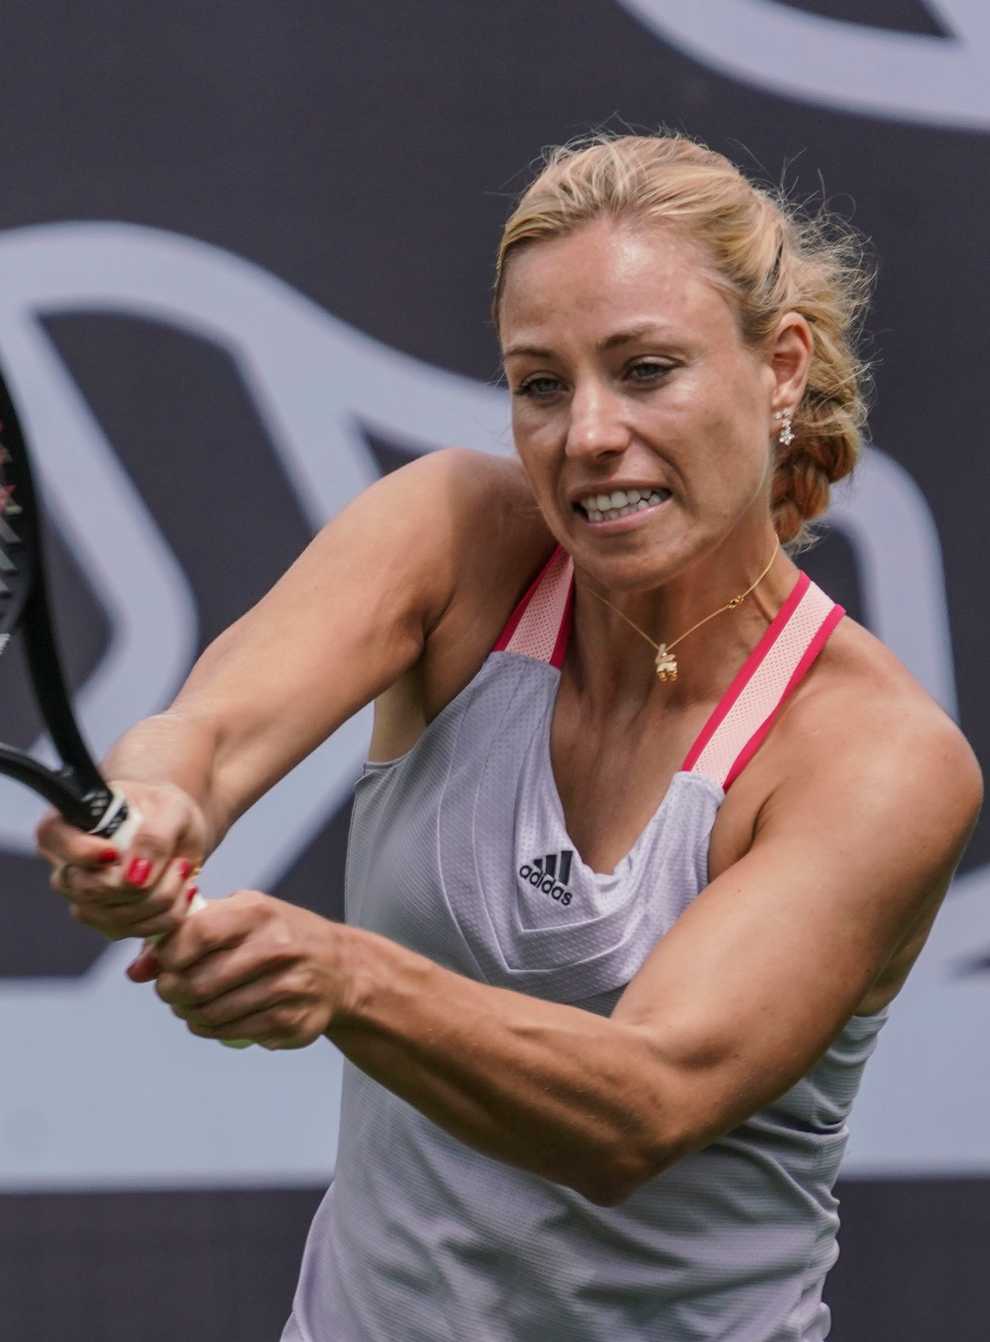 Angelique Kerber is undecided about playing in the US Open